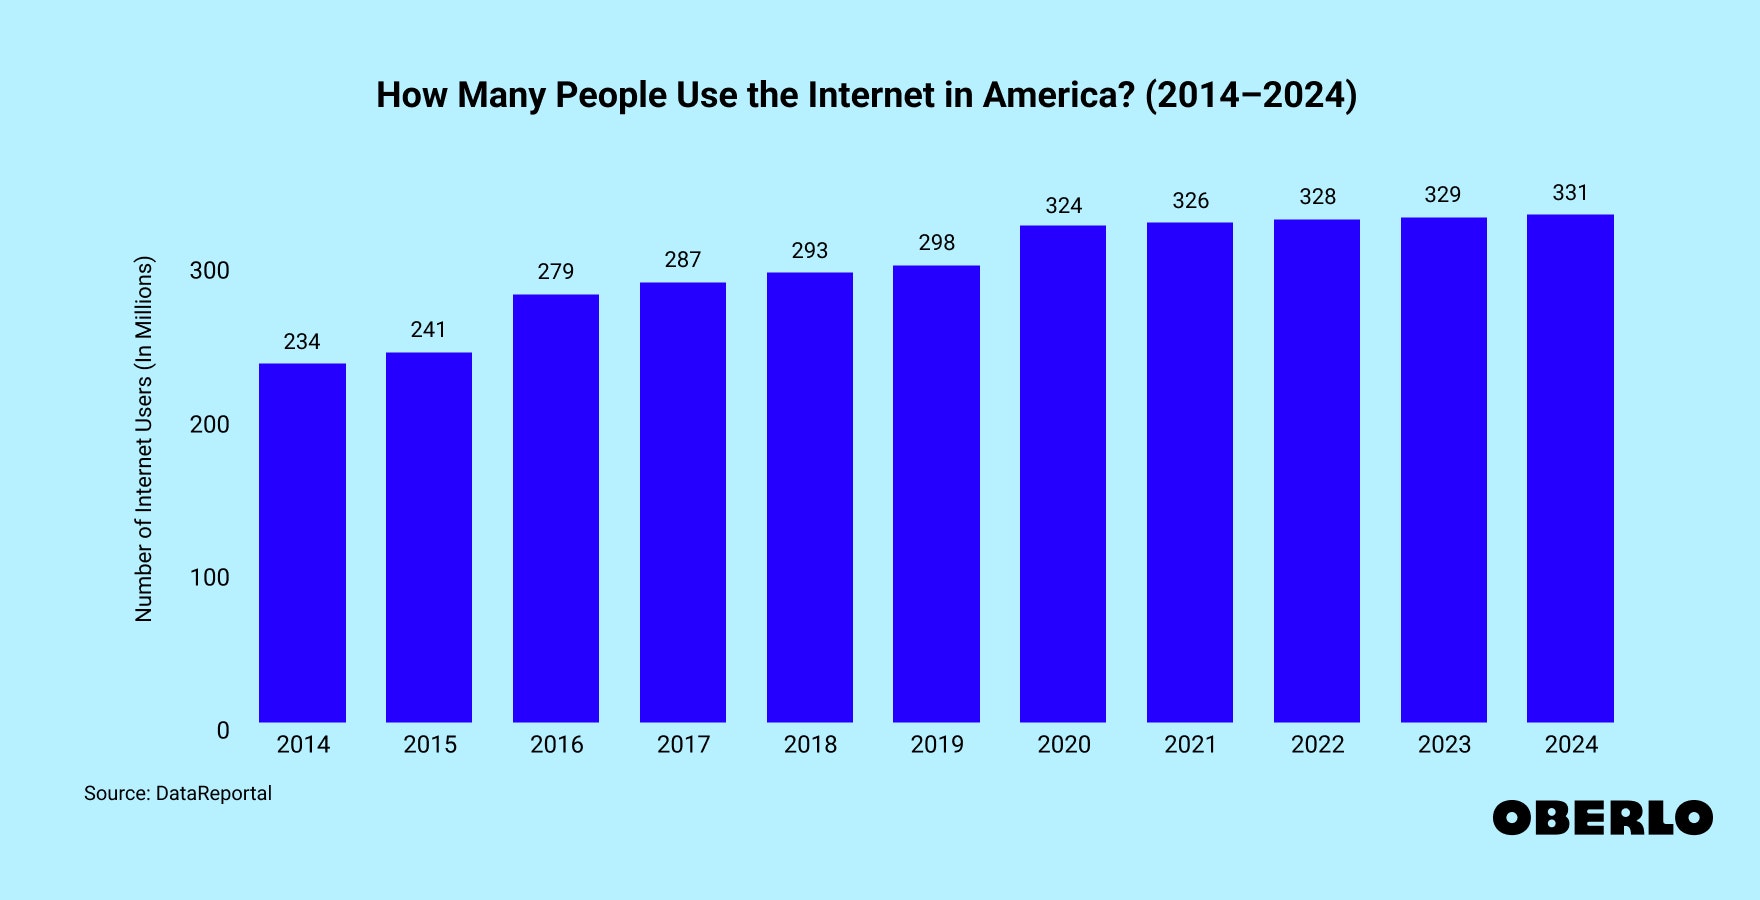 Chart showing how many Americans use the internet from 2014 to 2024